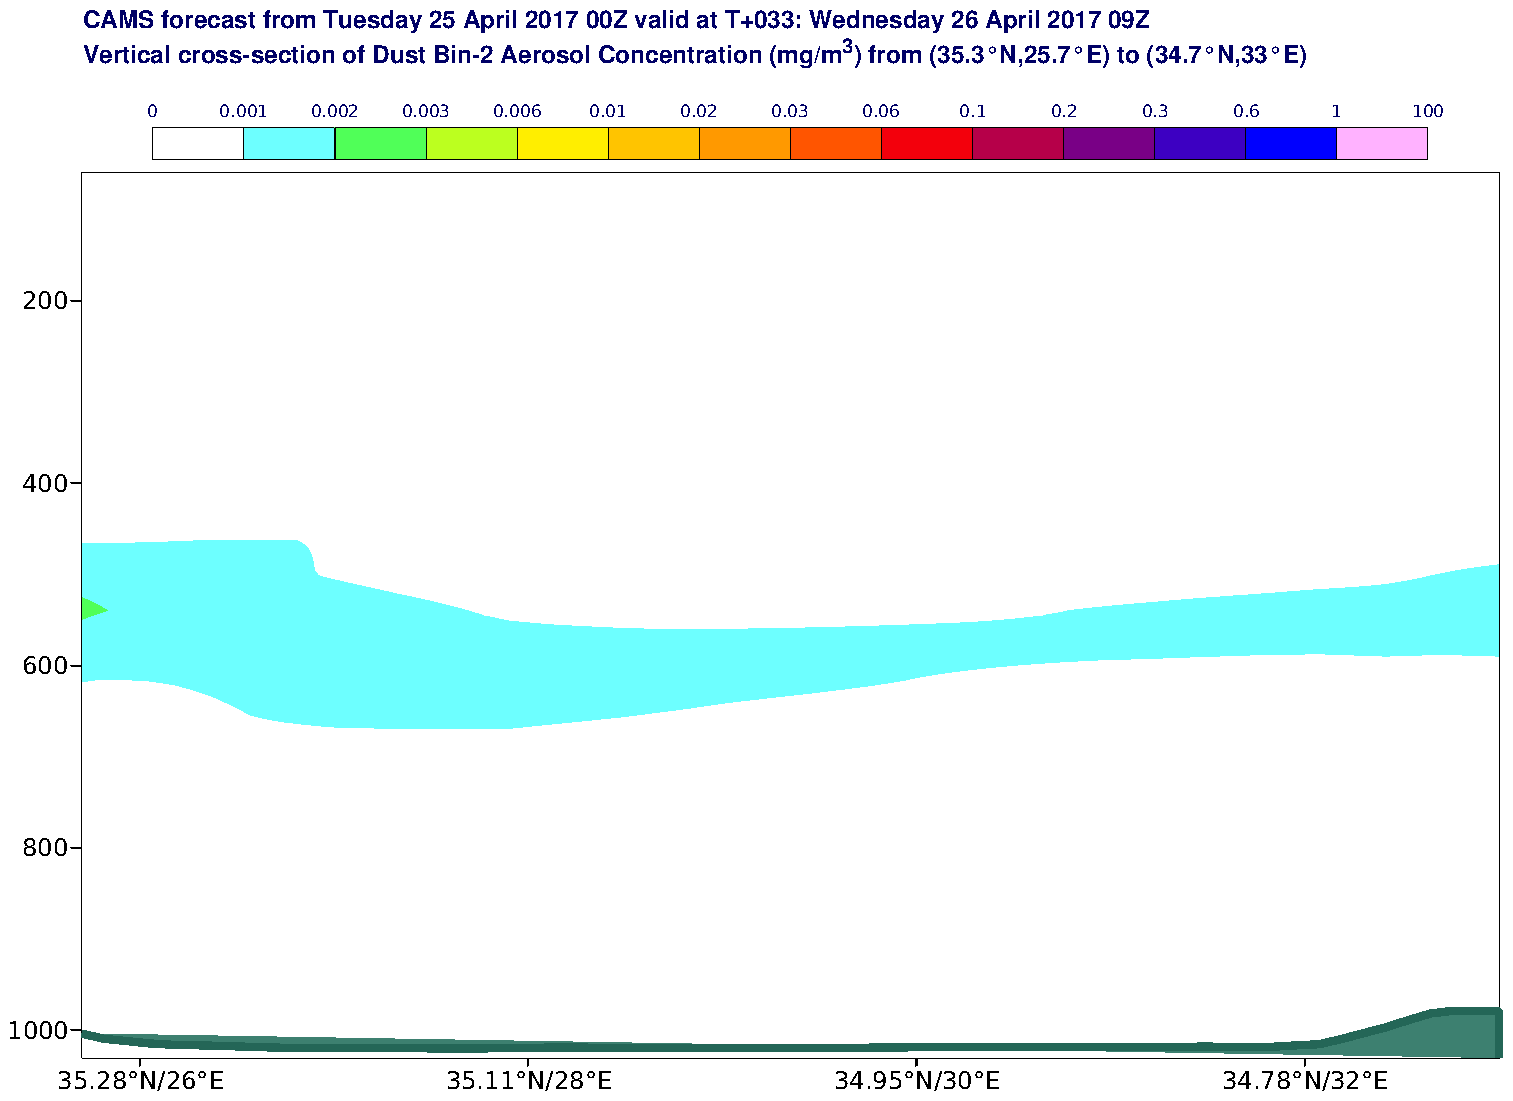 Vertical cross-section of Dust Bin-2 Aerosol Concentration (mg/m3) valid at T33 - 2017-04-26 09:00